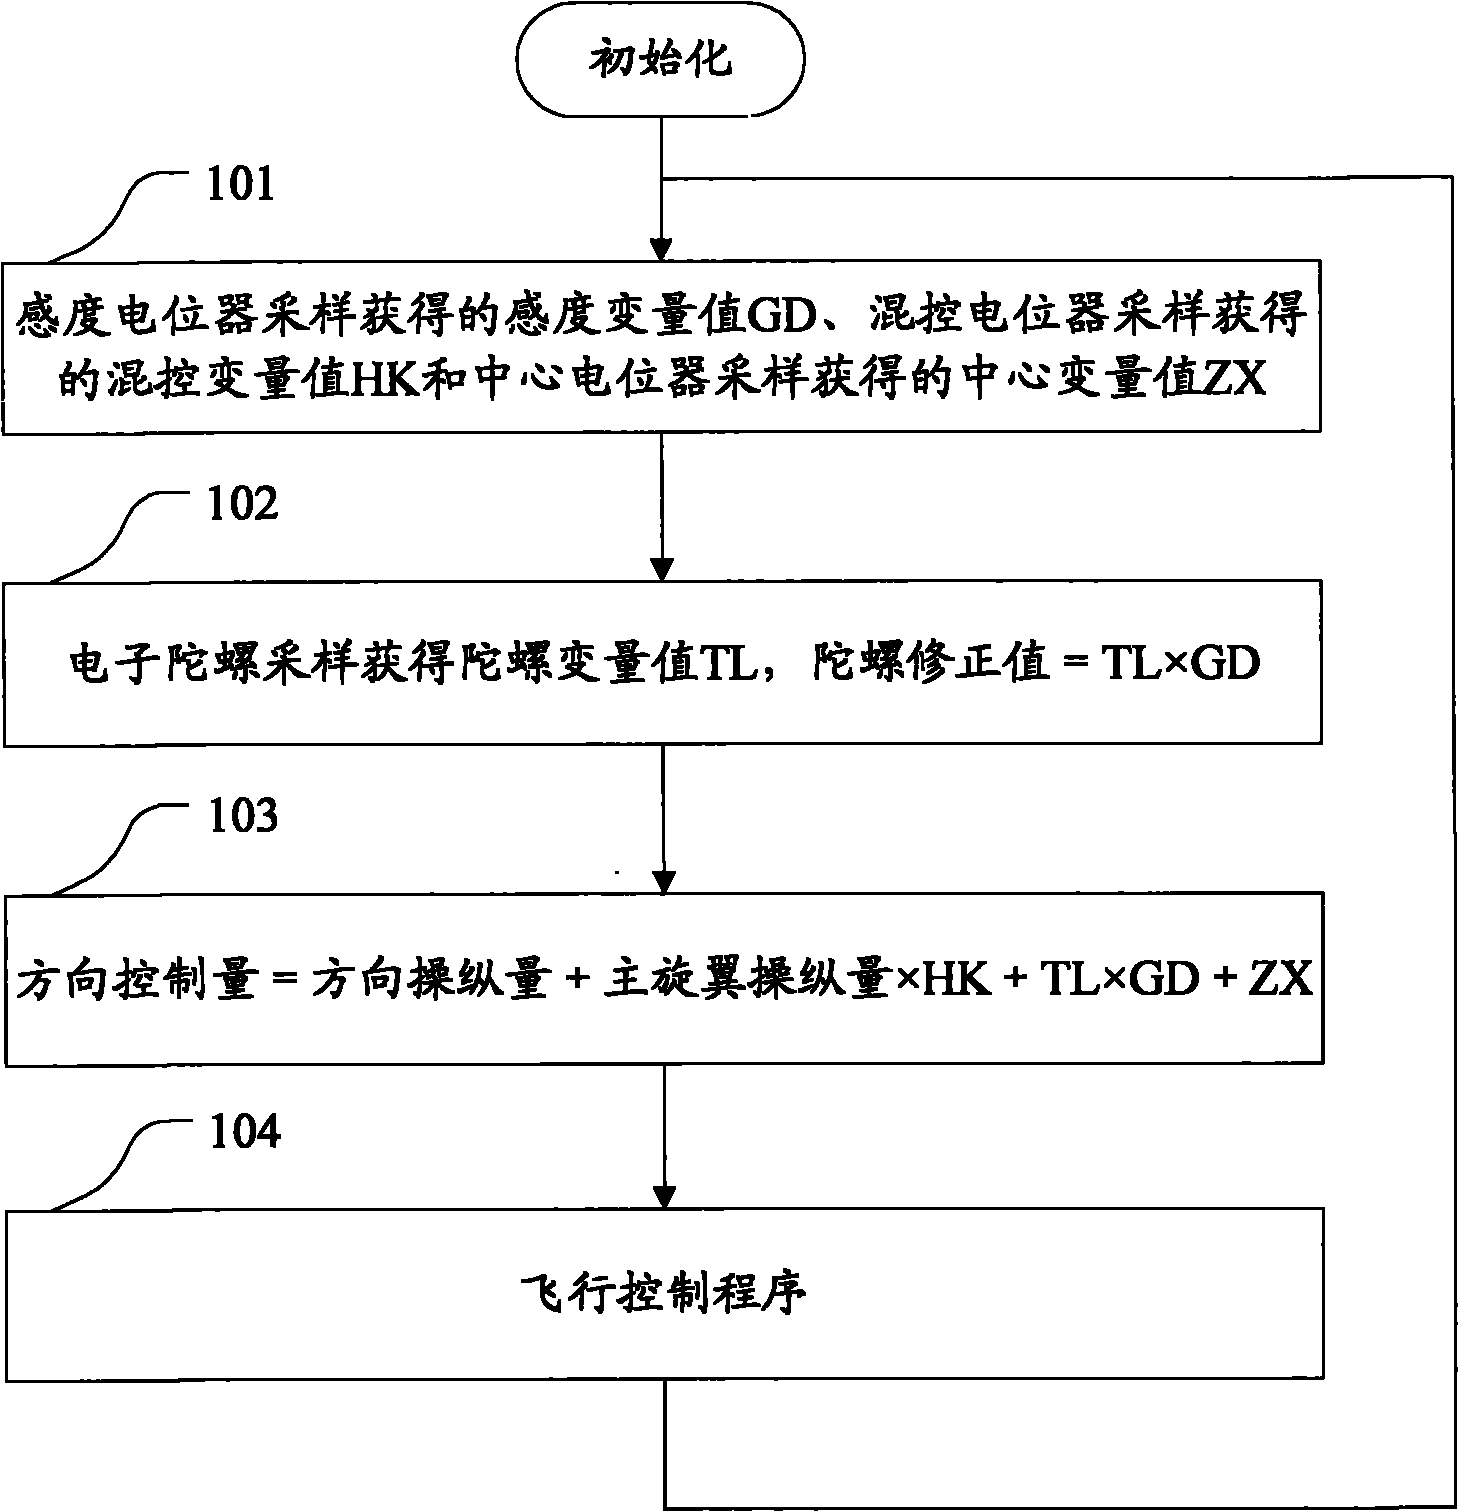 Method for adjusting parameters of remote control model receiver and remote control model